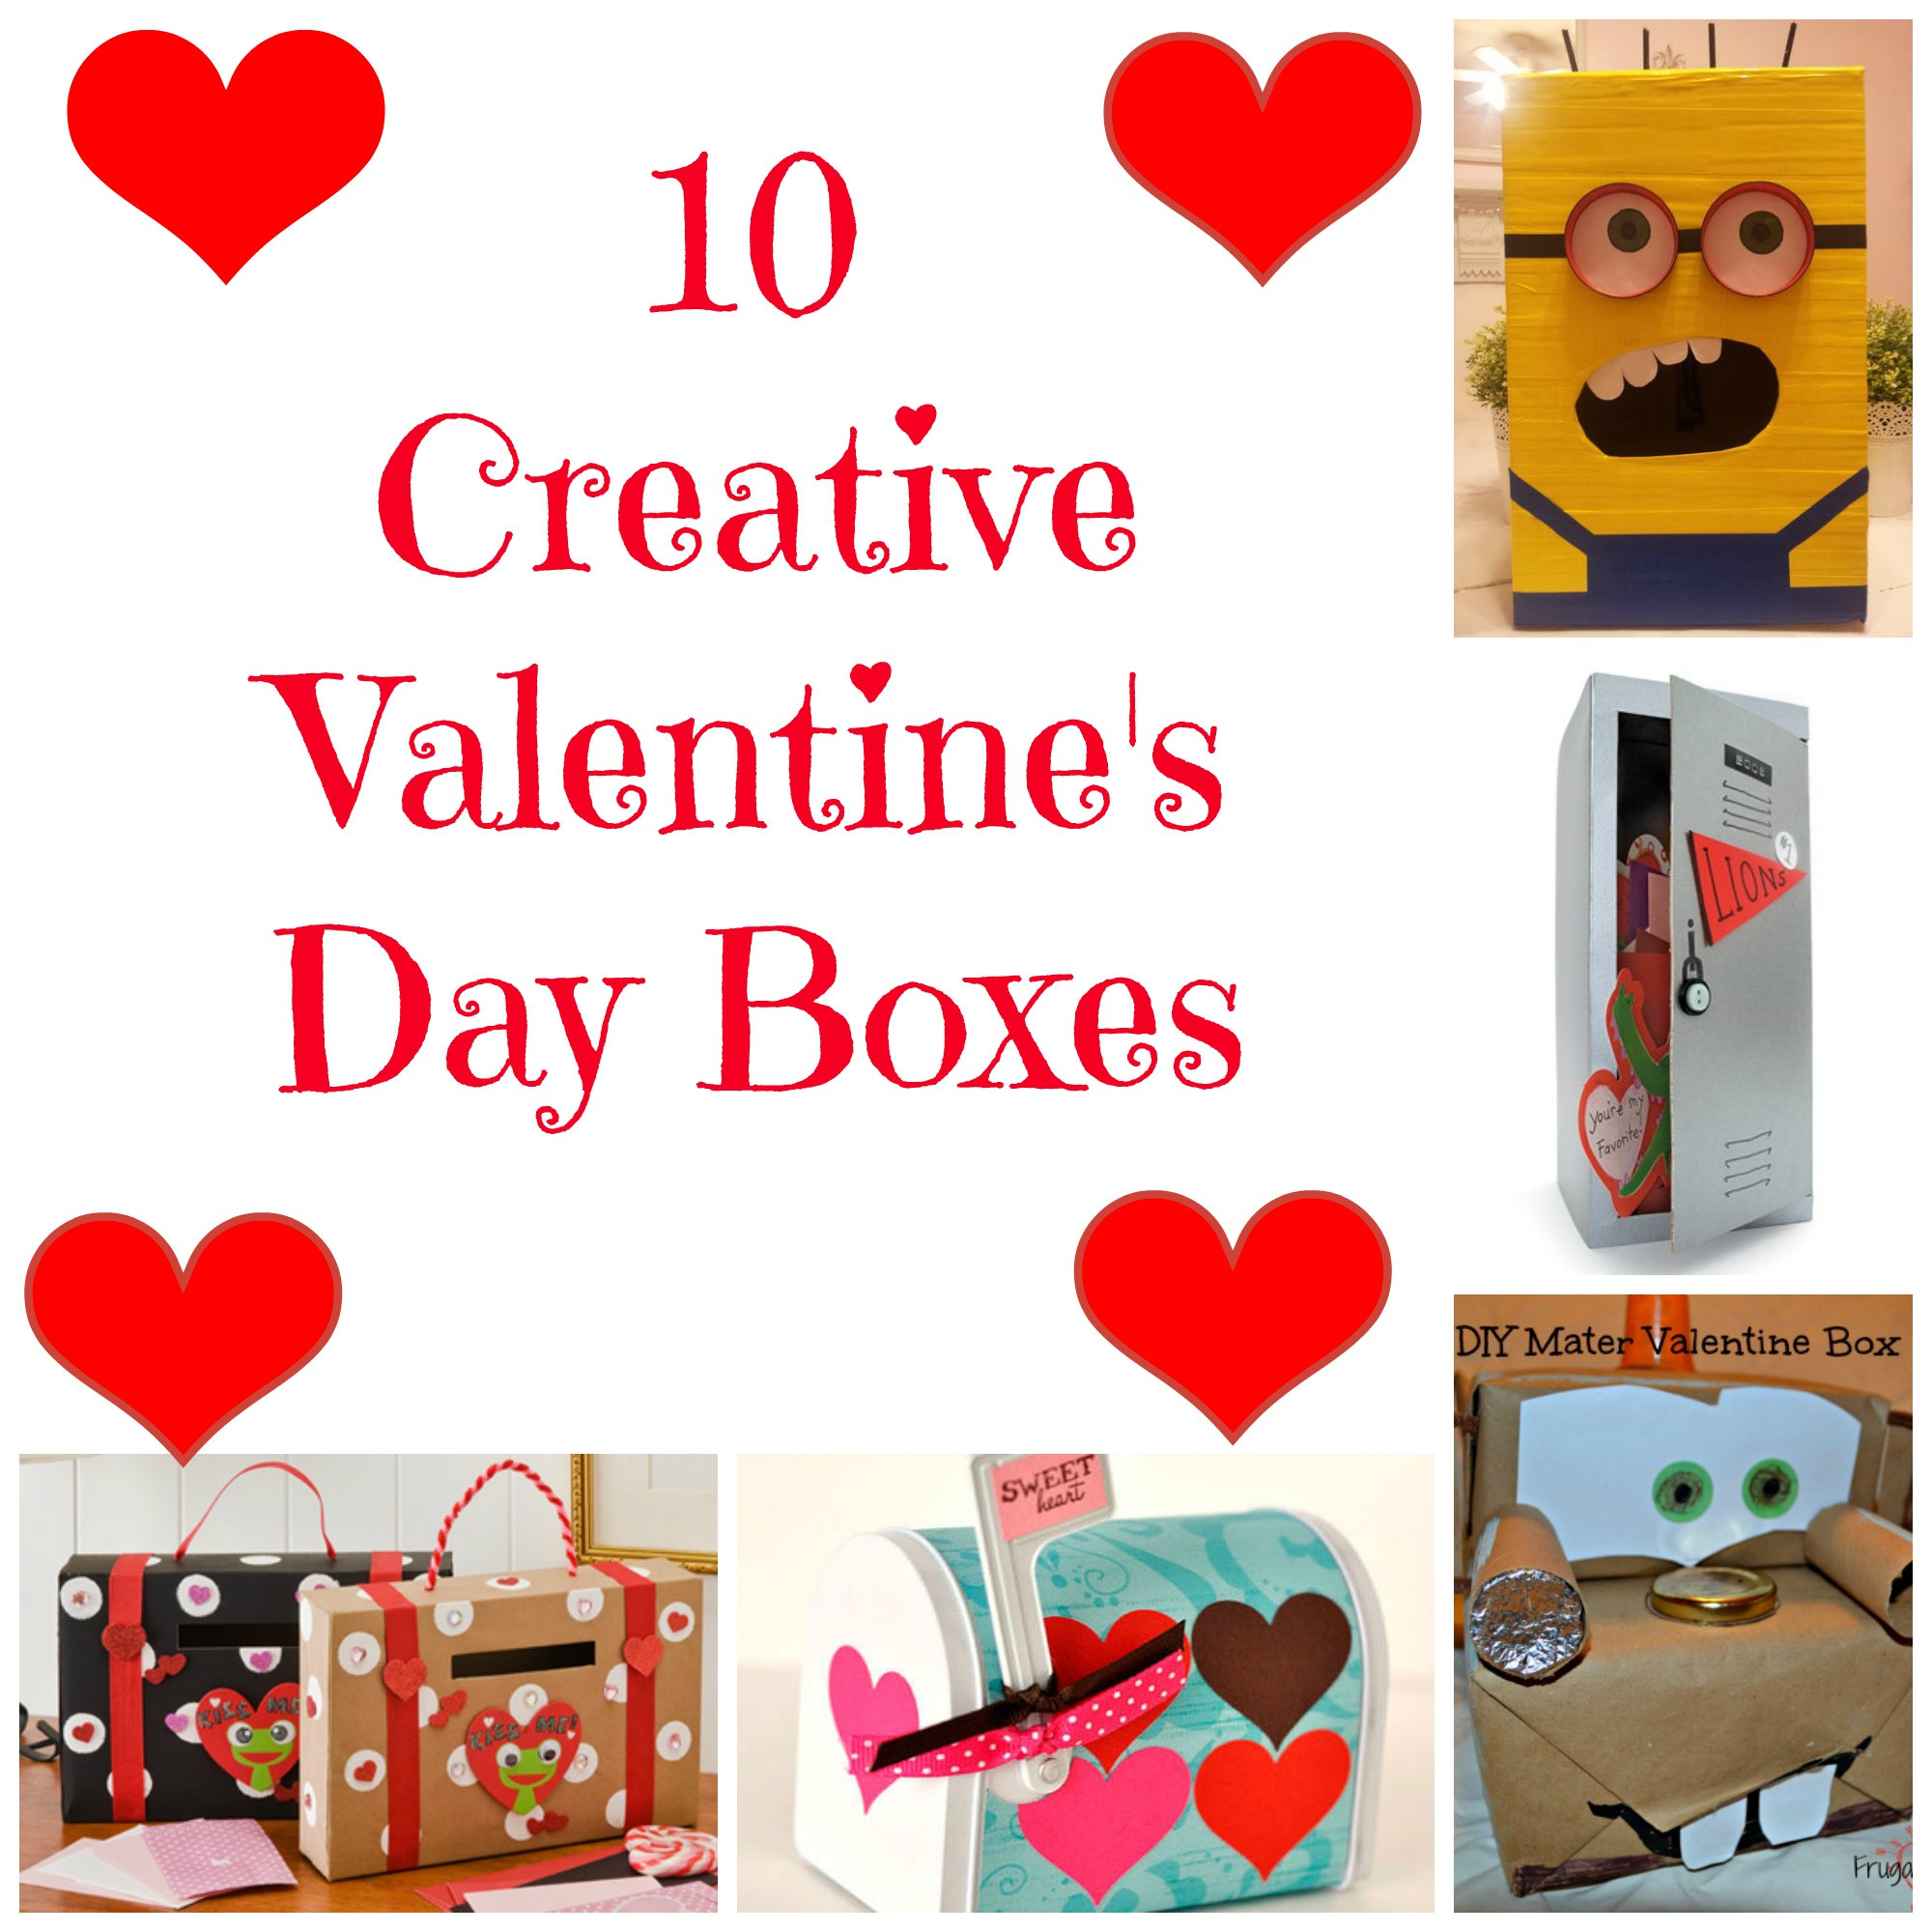 Valentines Day Card Box Ideas
 Valentine s Day Box Ideas for Kids to Make